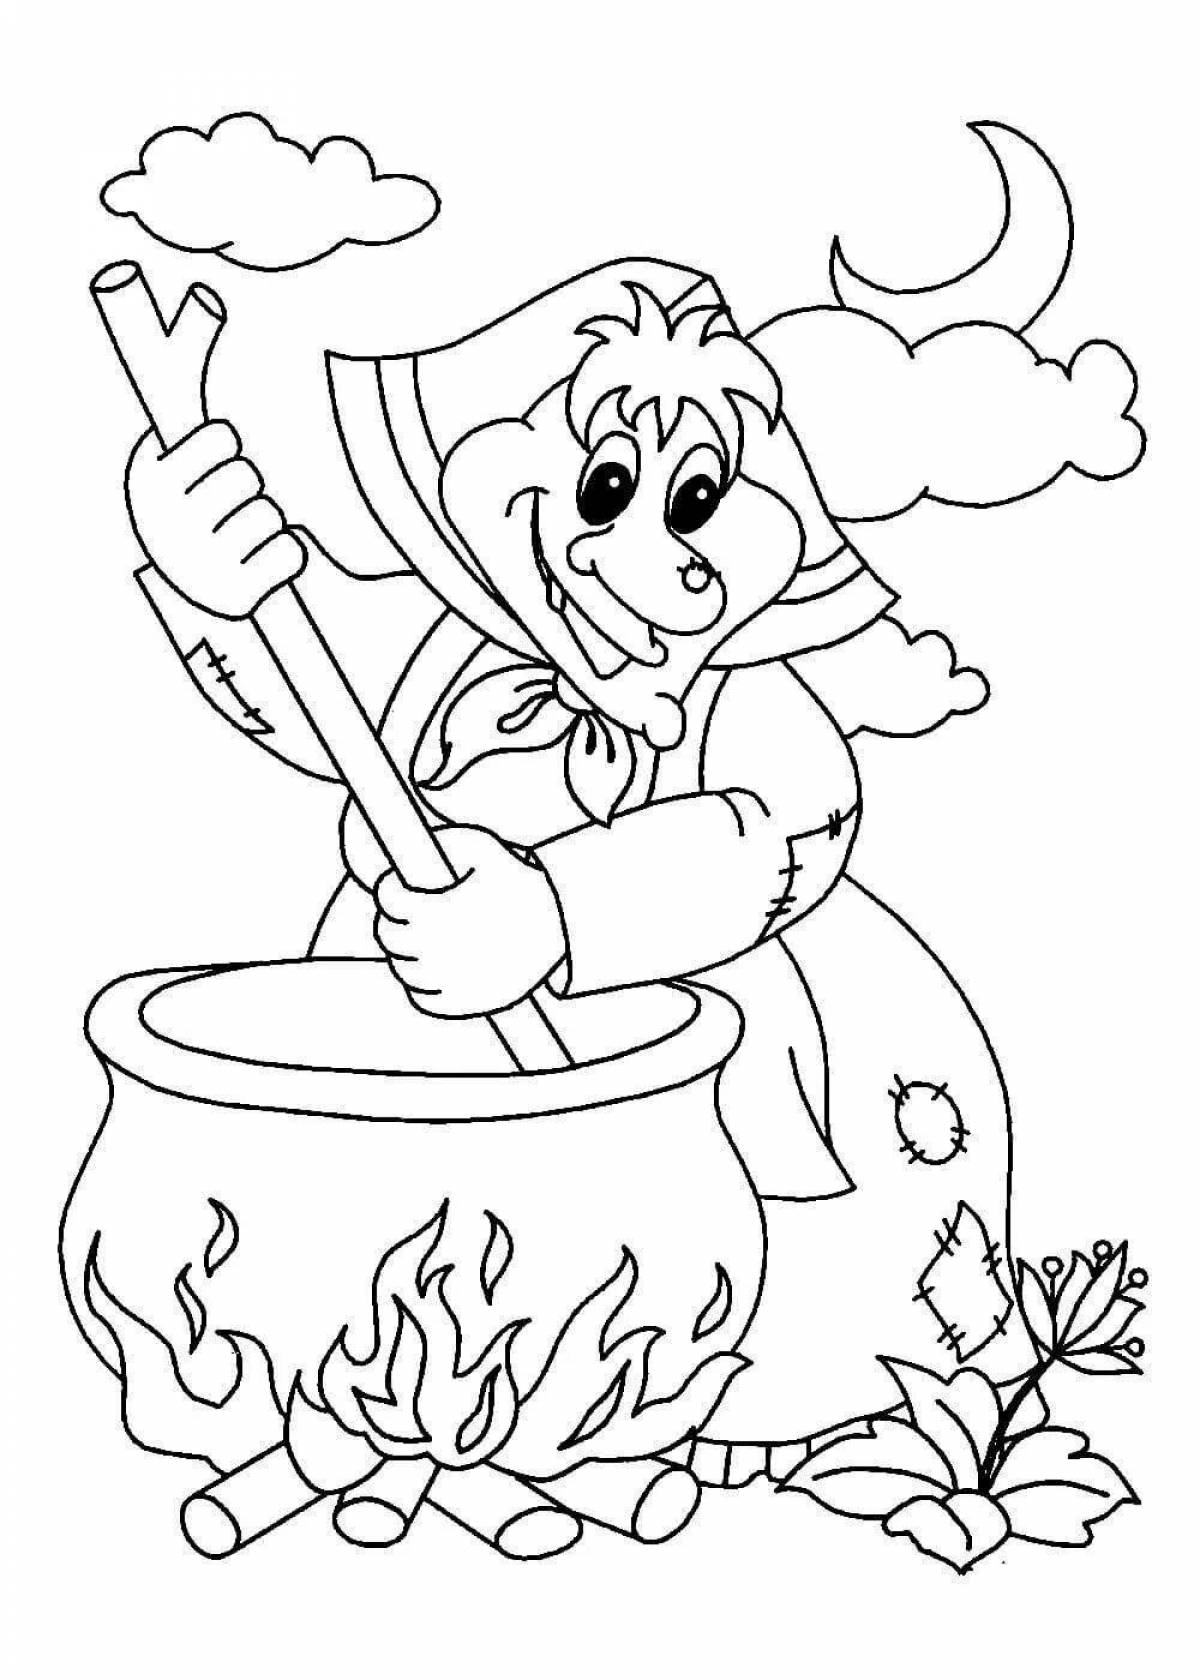 Outstanding baba yaga coloring book for children